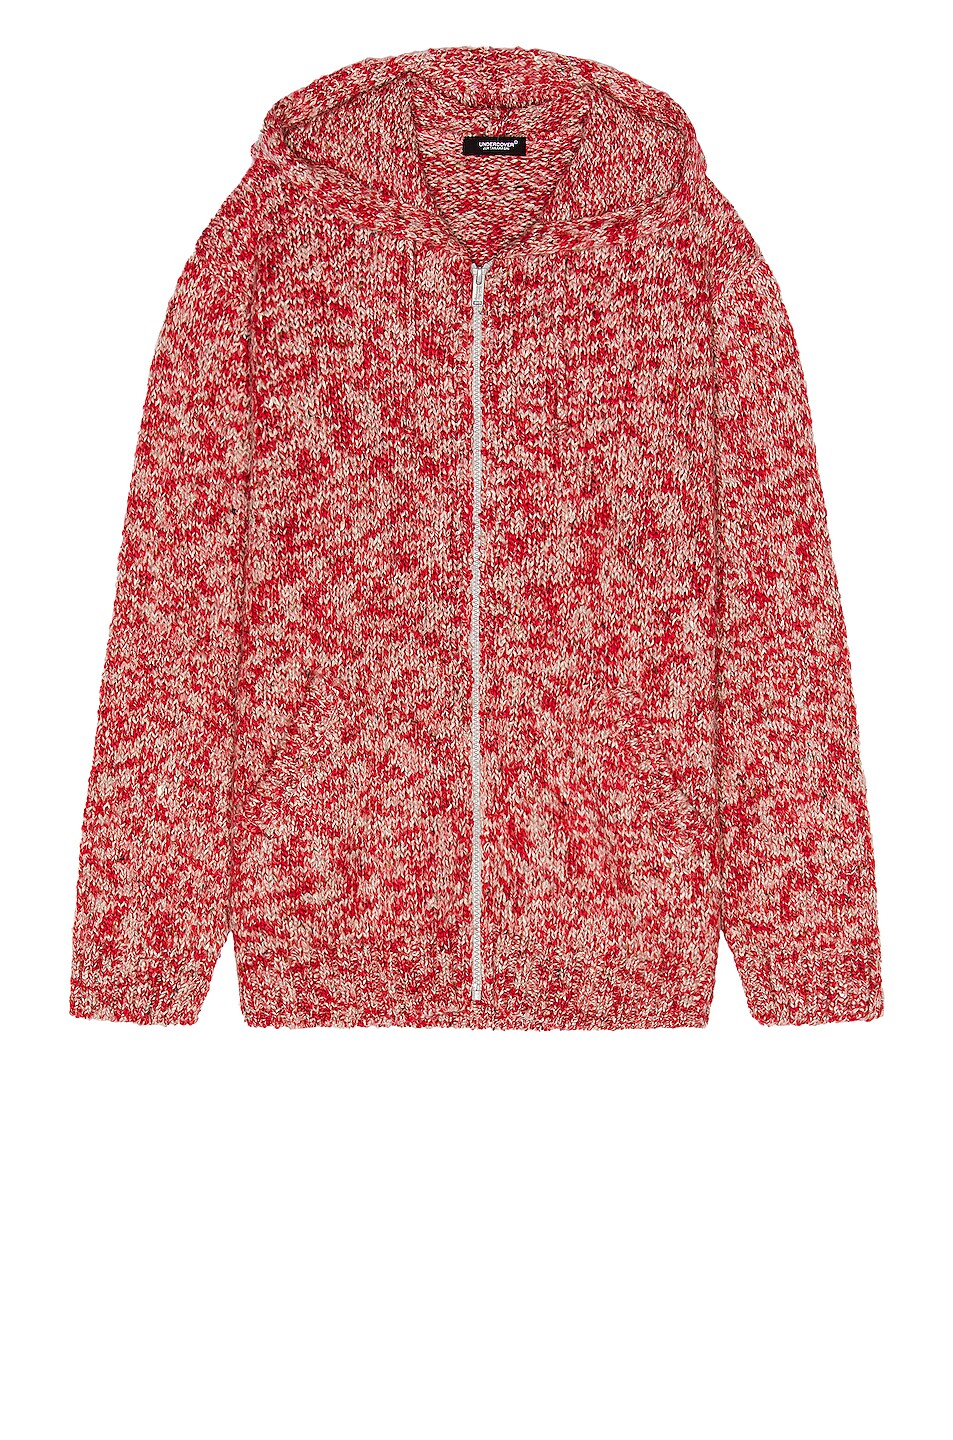 Image 1 of Undercover Knit Hoodie in Red Mix